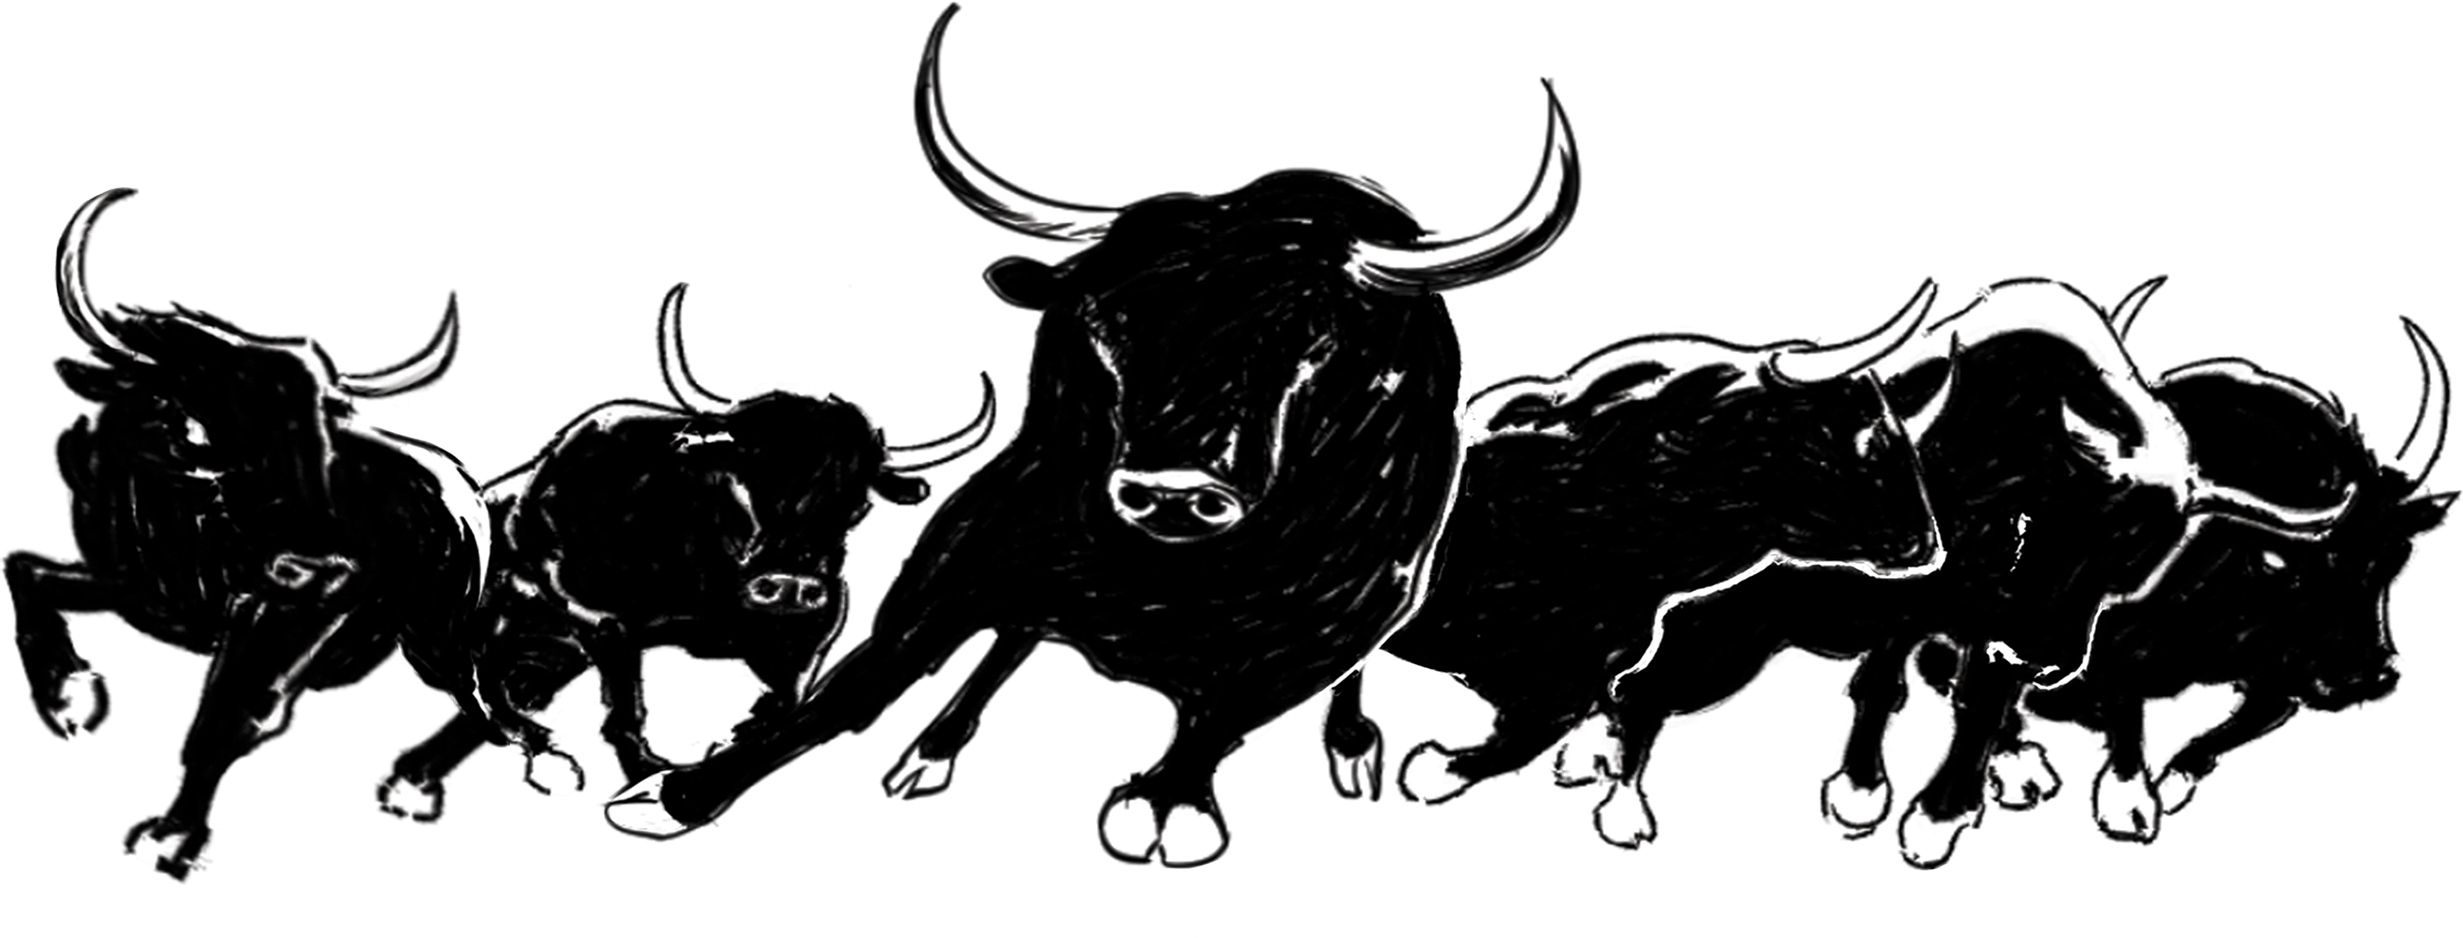 A line of black bulls with large horns stampedes across a landscape of digital ones and zeros.